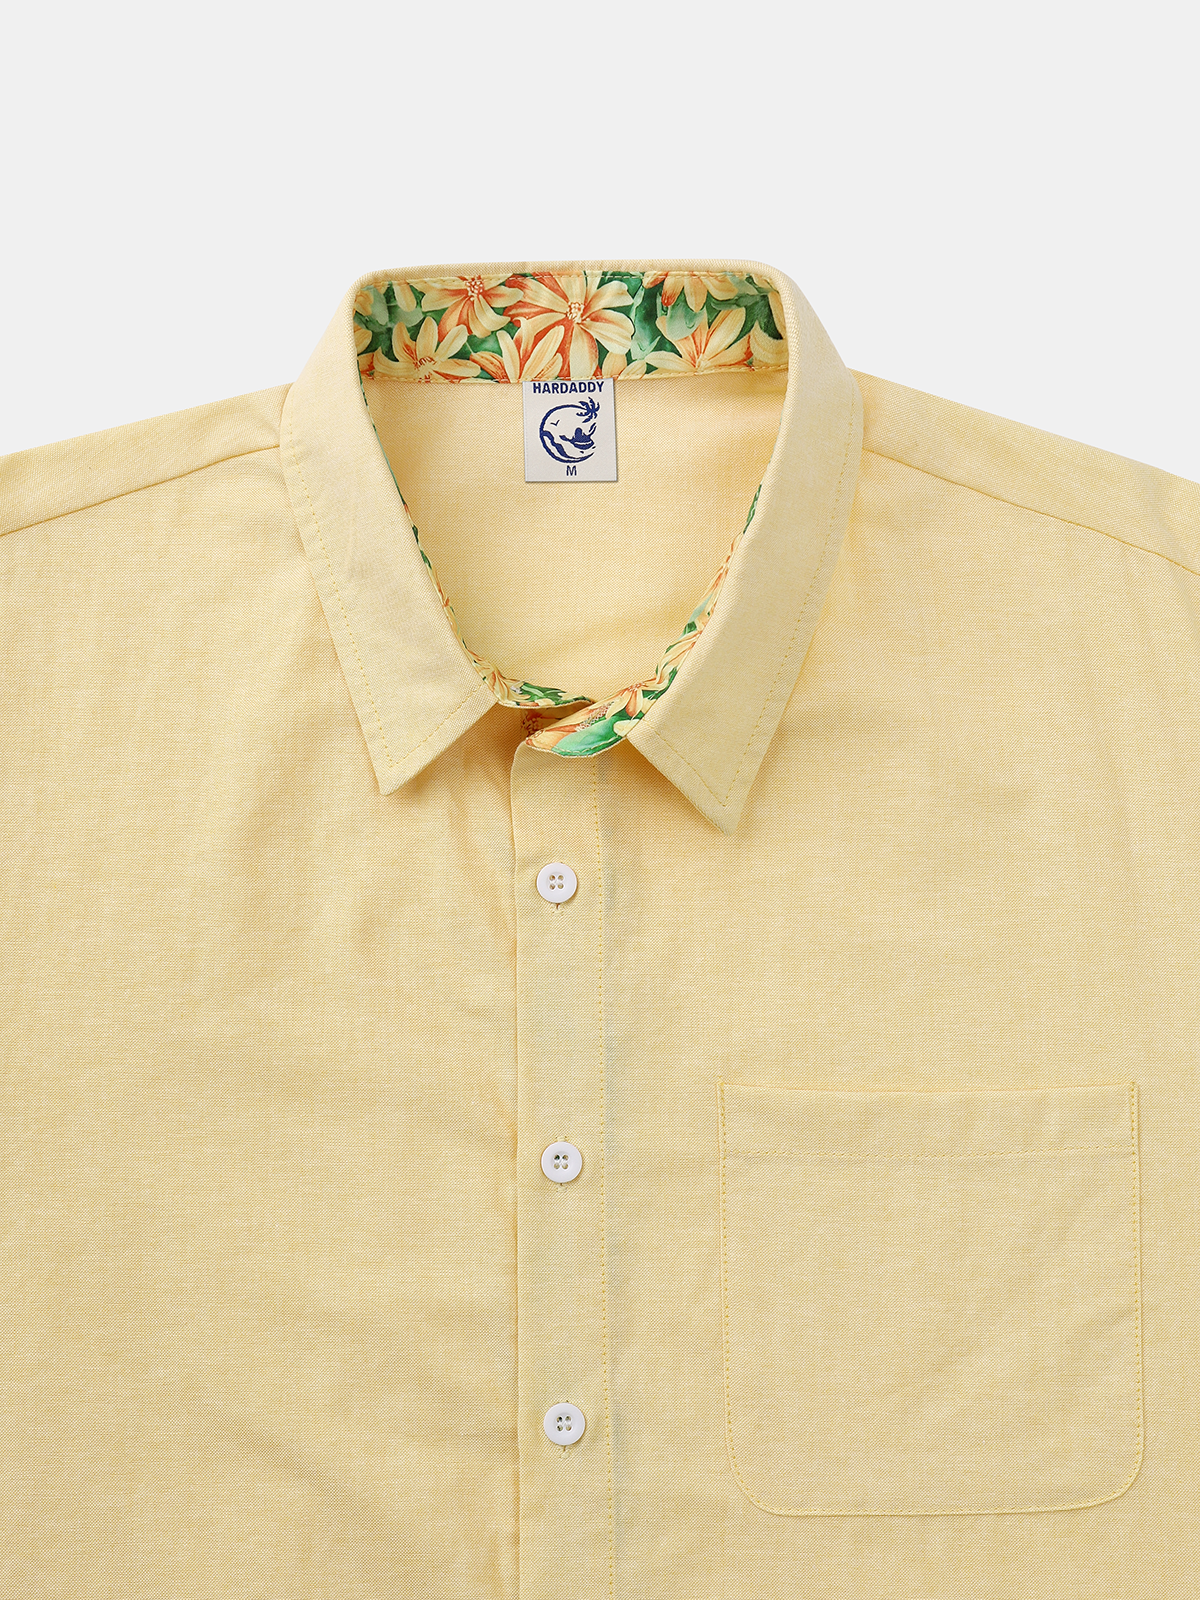 Hardaddy Cotton Floral Contrast Short Sleeve Shirt